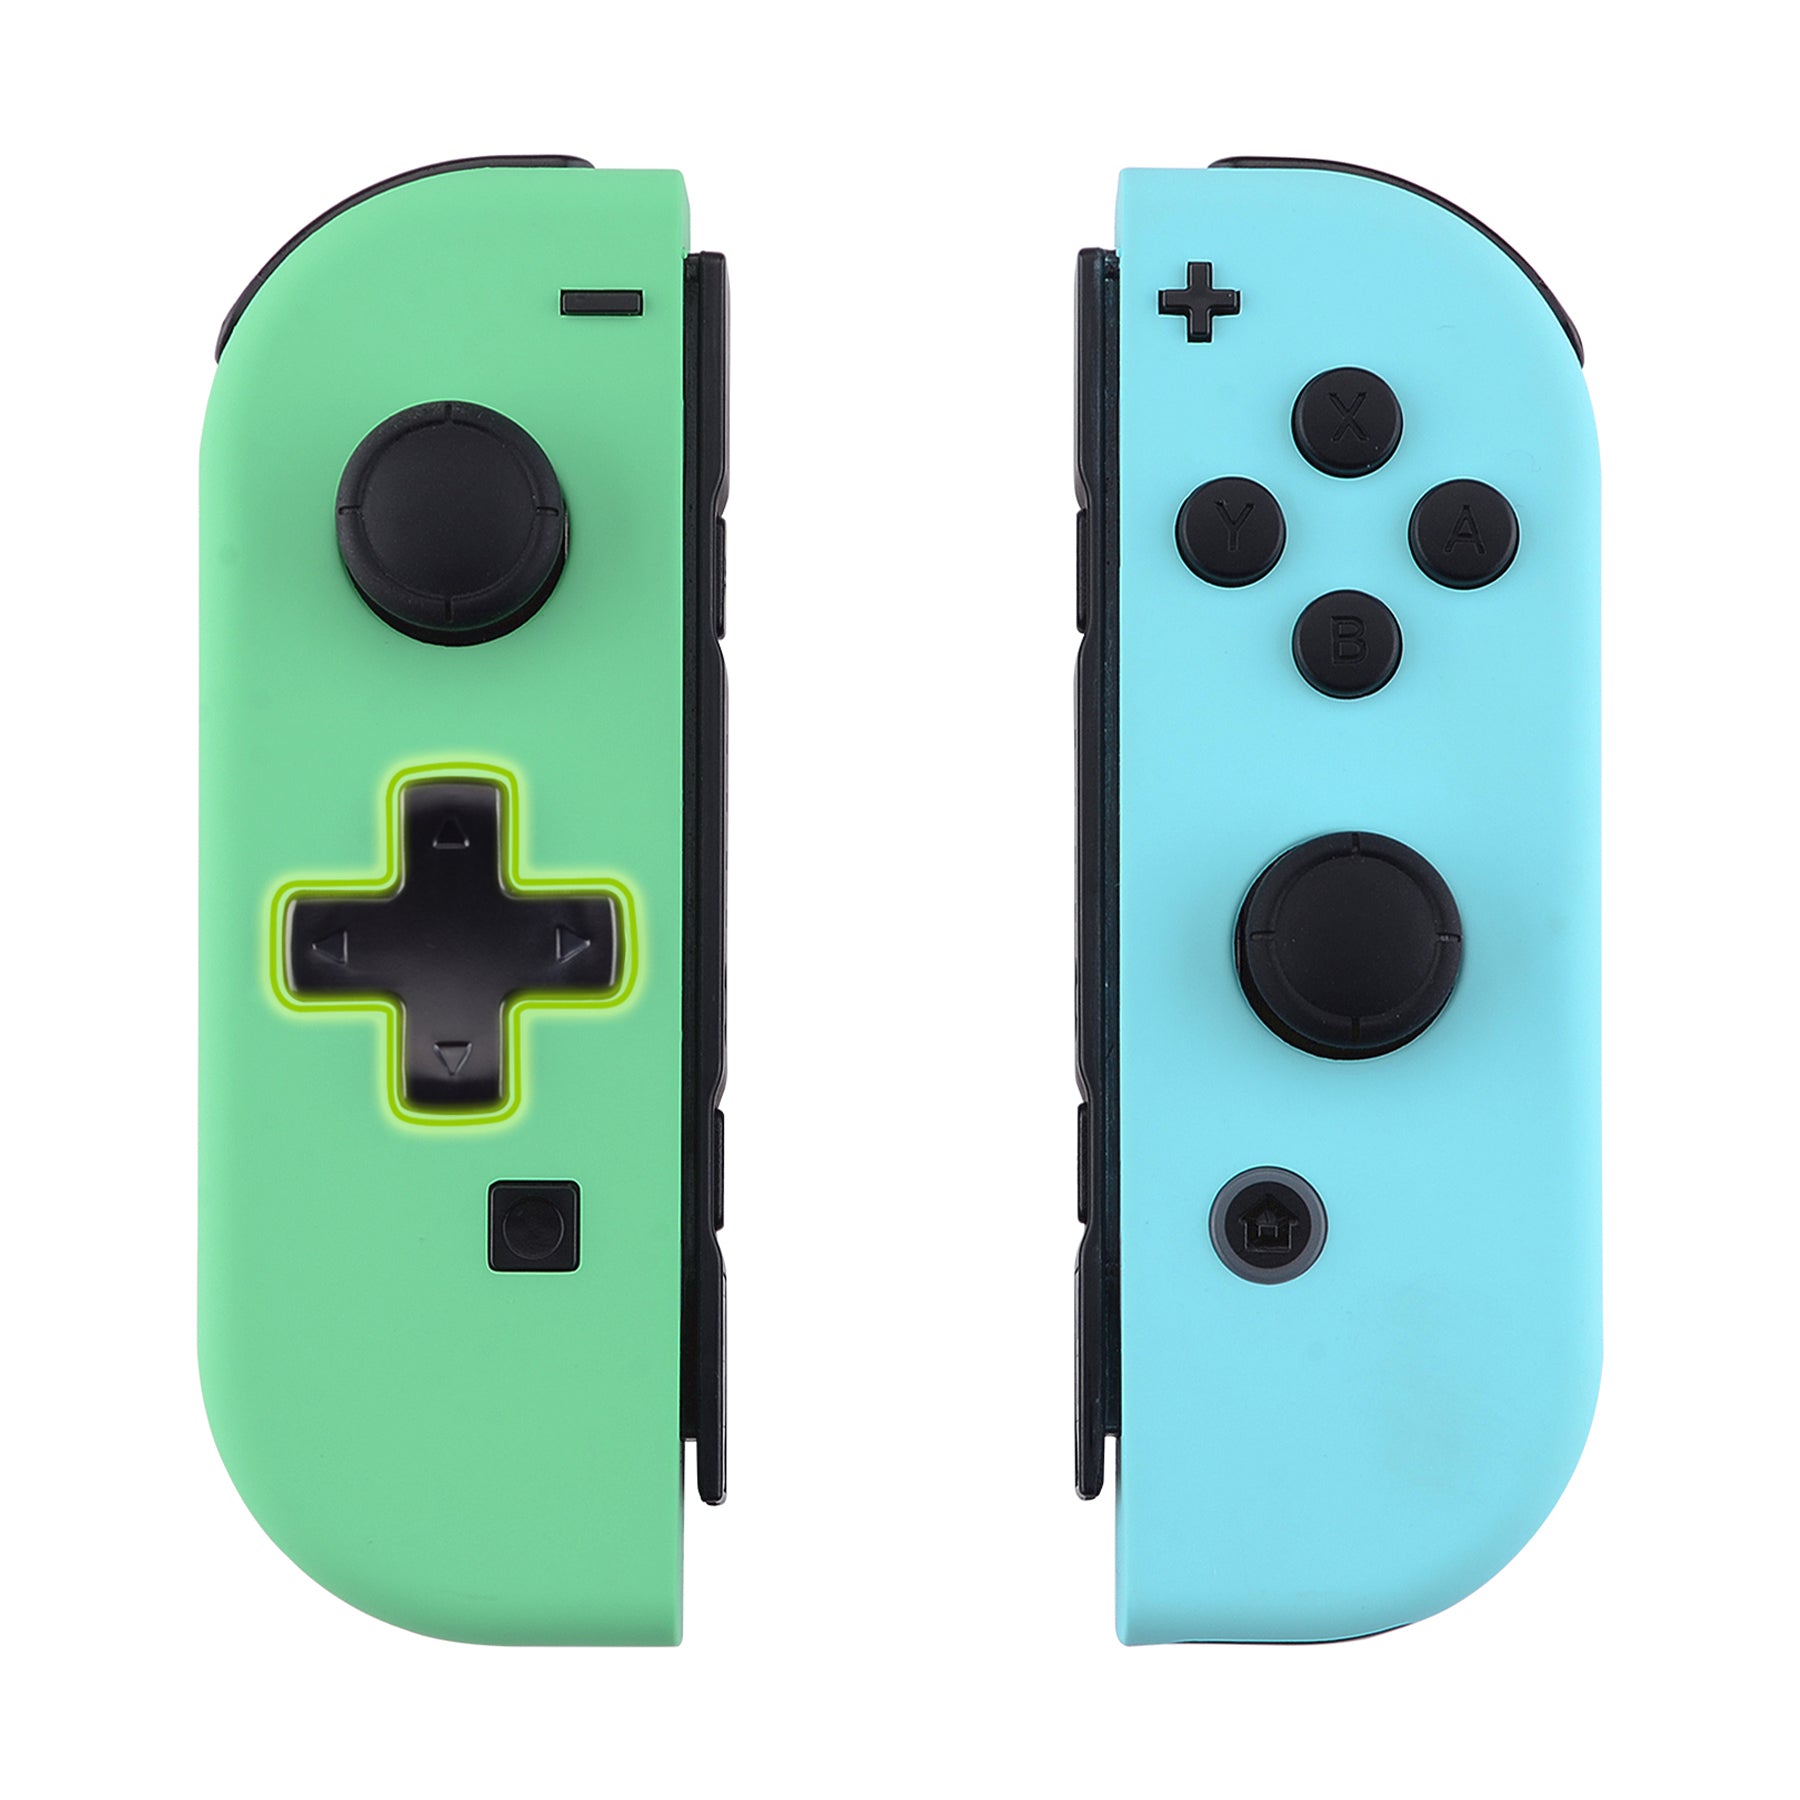 eXtremeRate Dpad Version Replacement Full Set Shell Case with Buttons for Joycon of NS Switch - Mint Green & Heaven Blue eXtremeRate